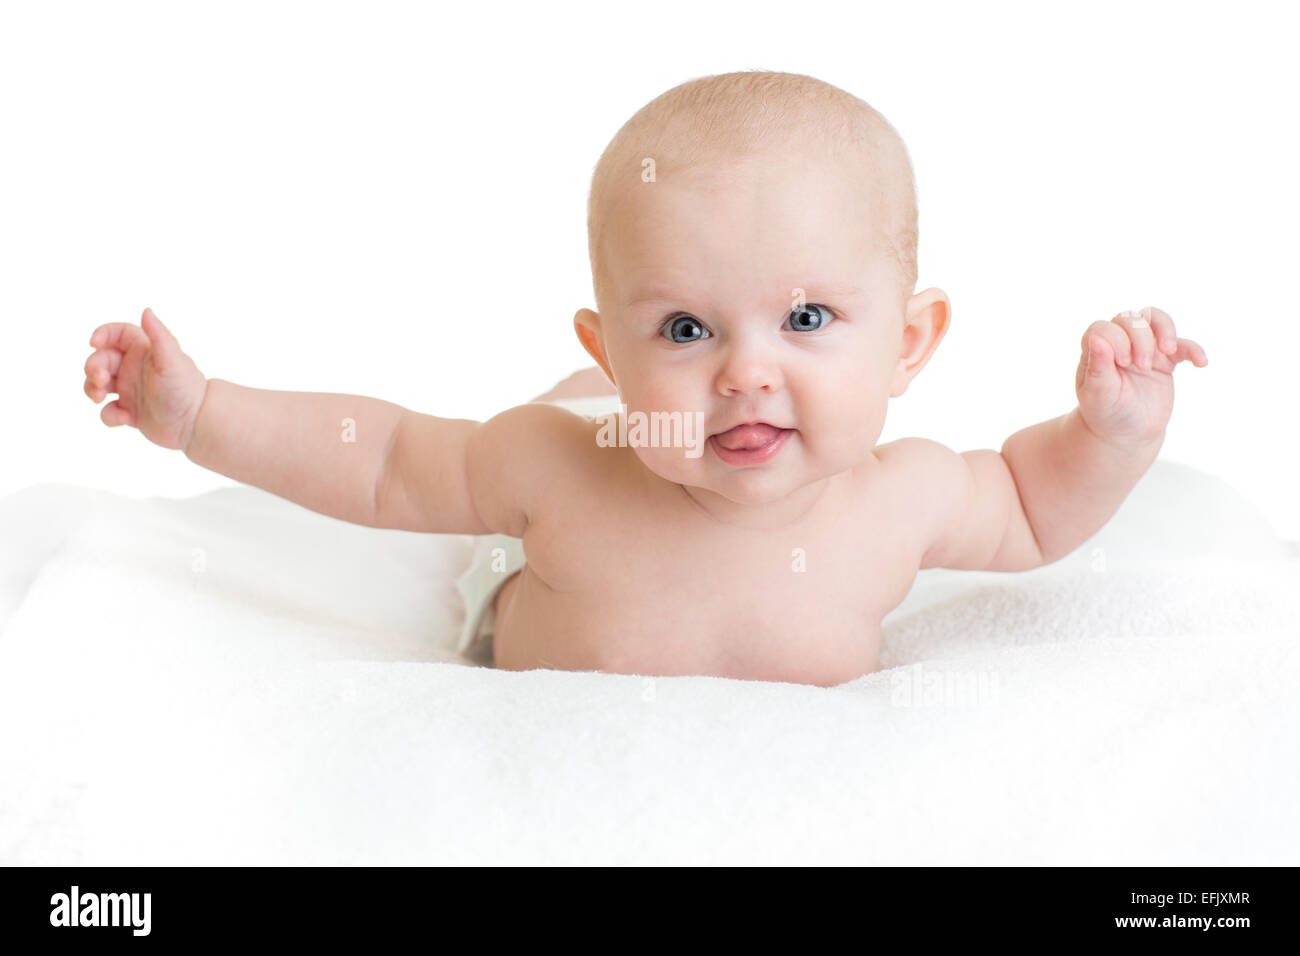 Cute healthy baby lying on white towel with hands up Stock Photo